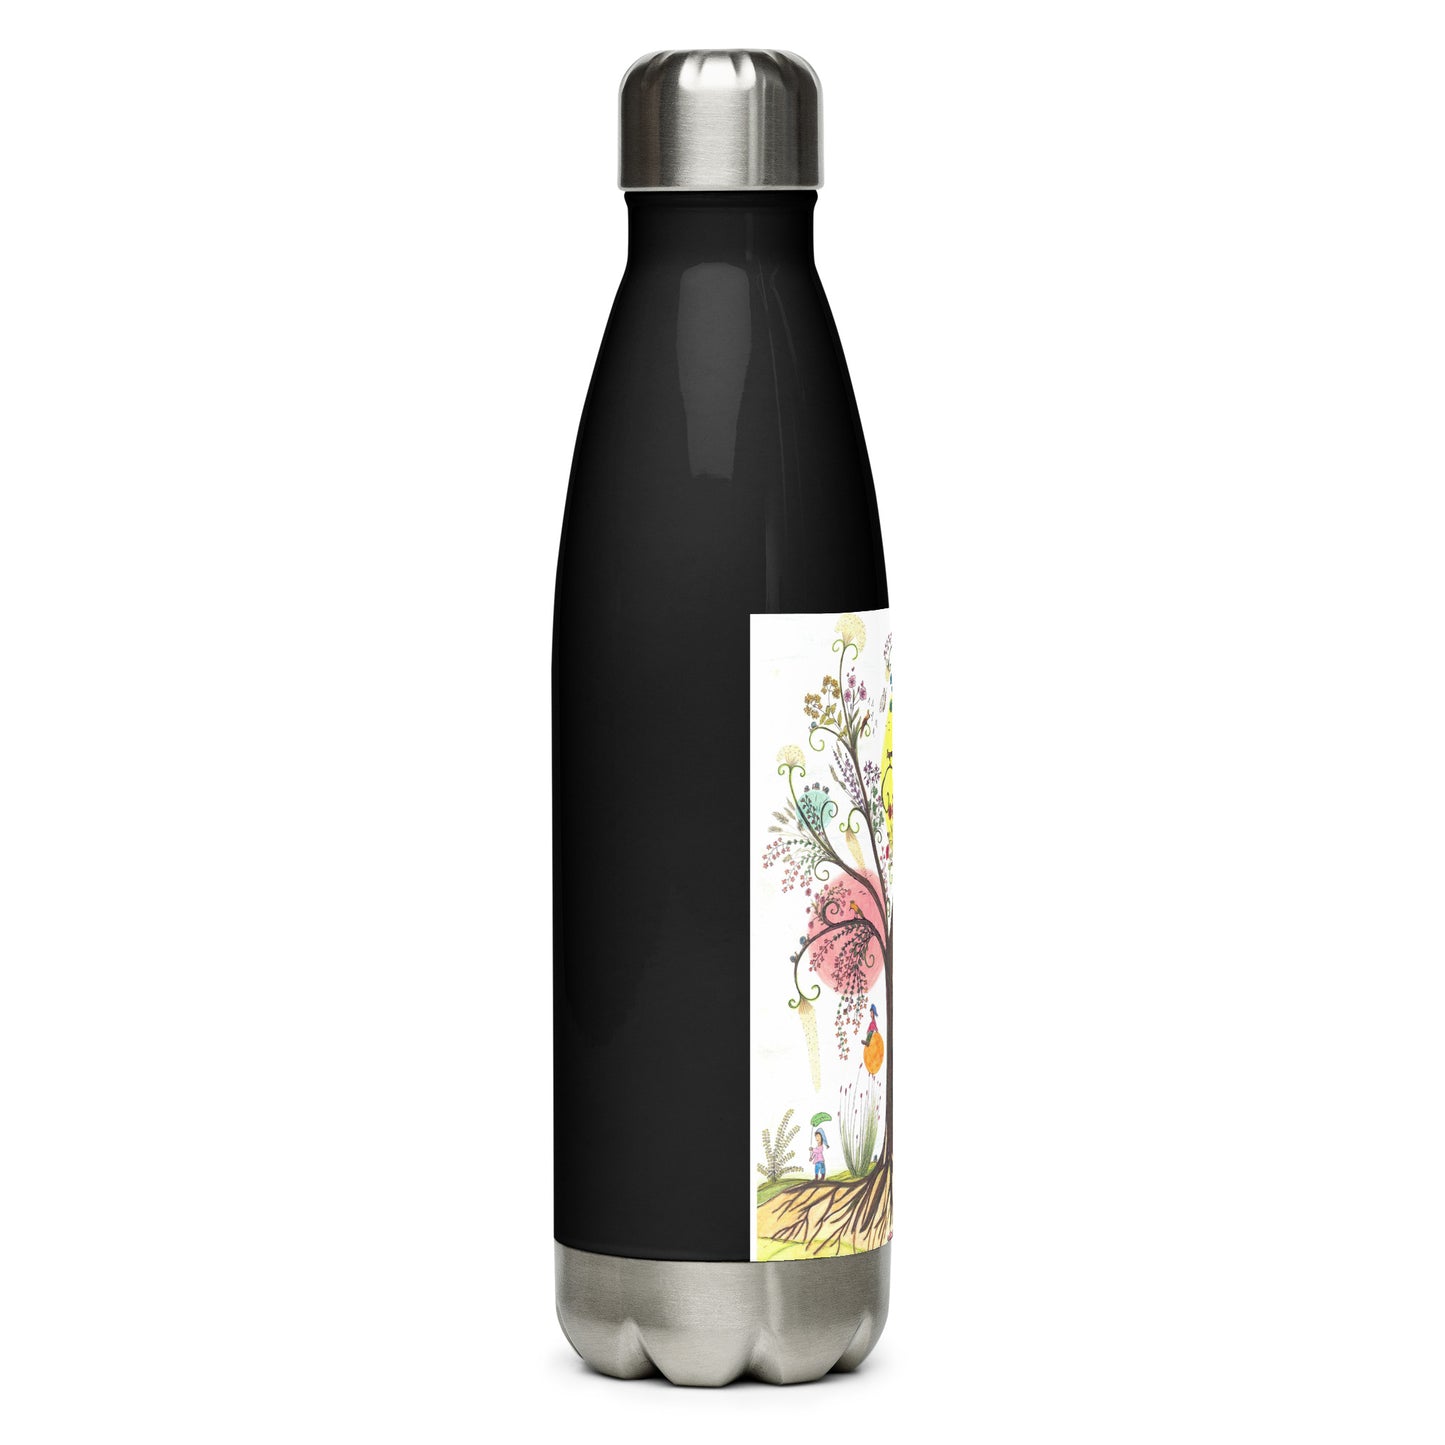 Protects recovered 500 ml stainless steel drinking bottle with double insulation